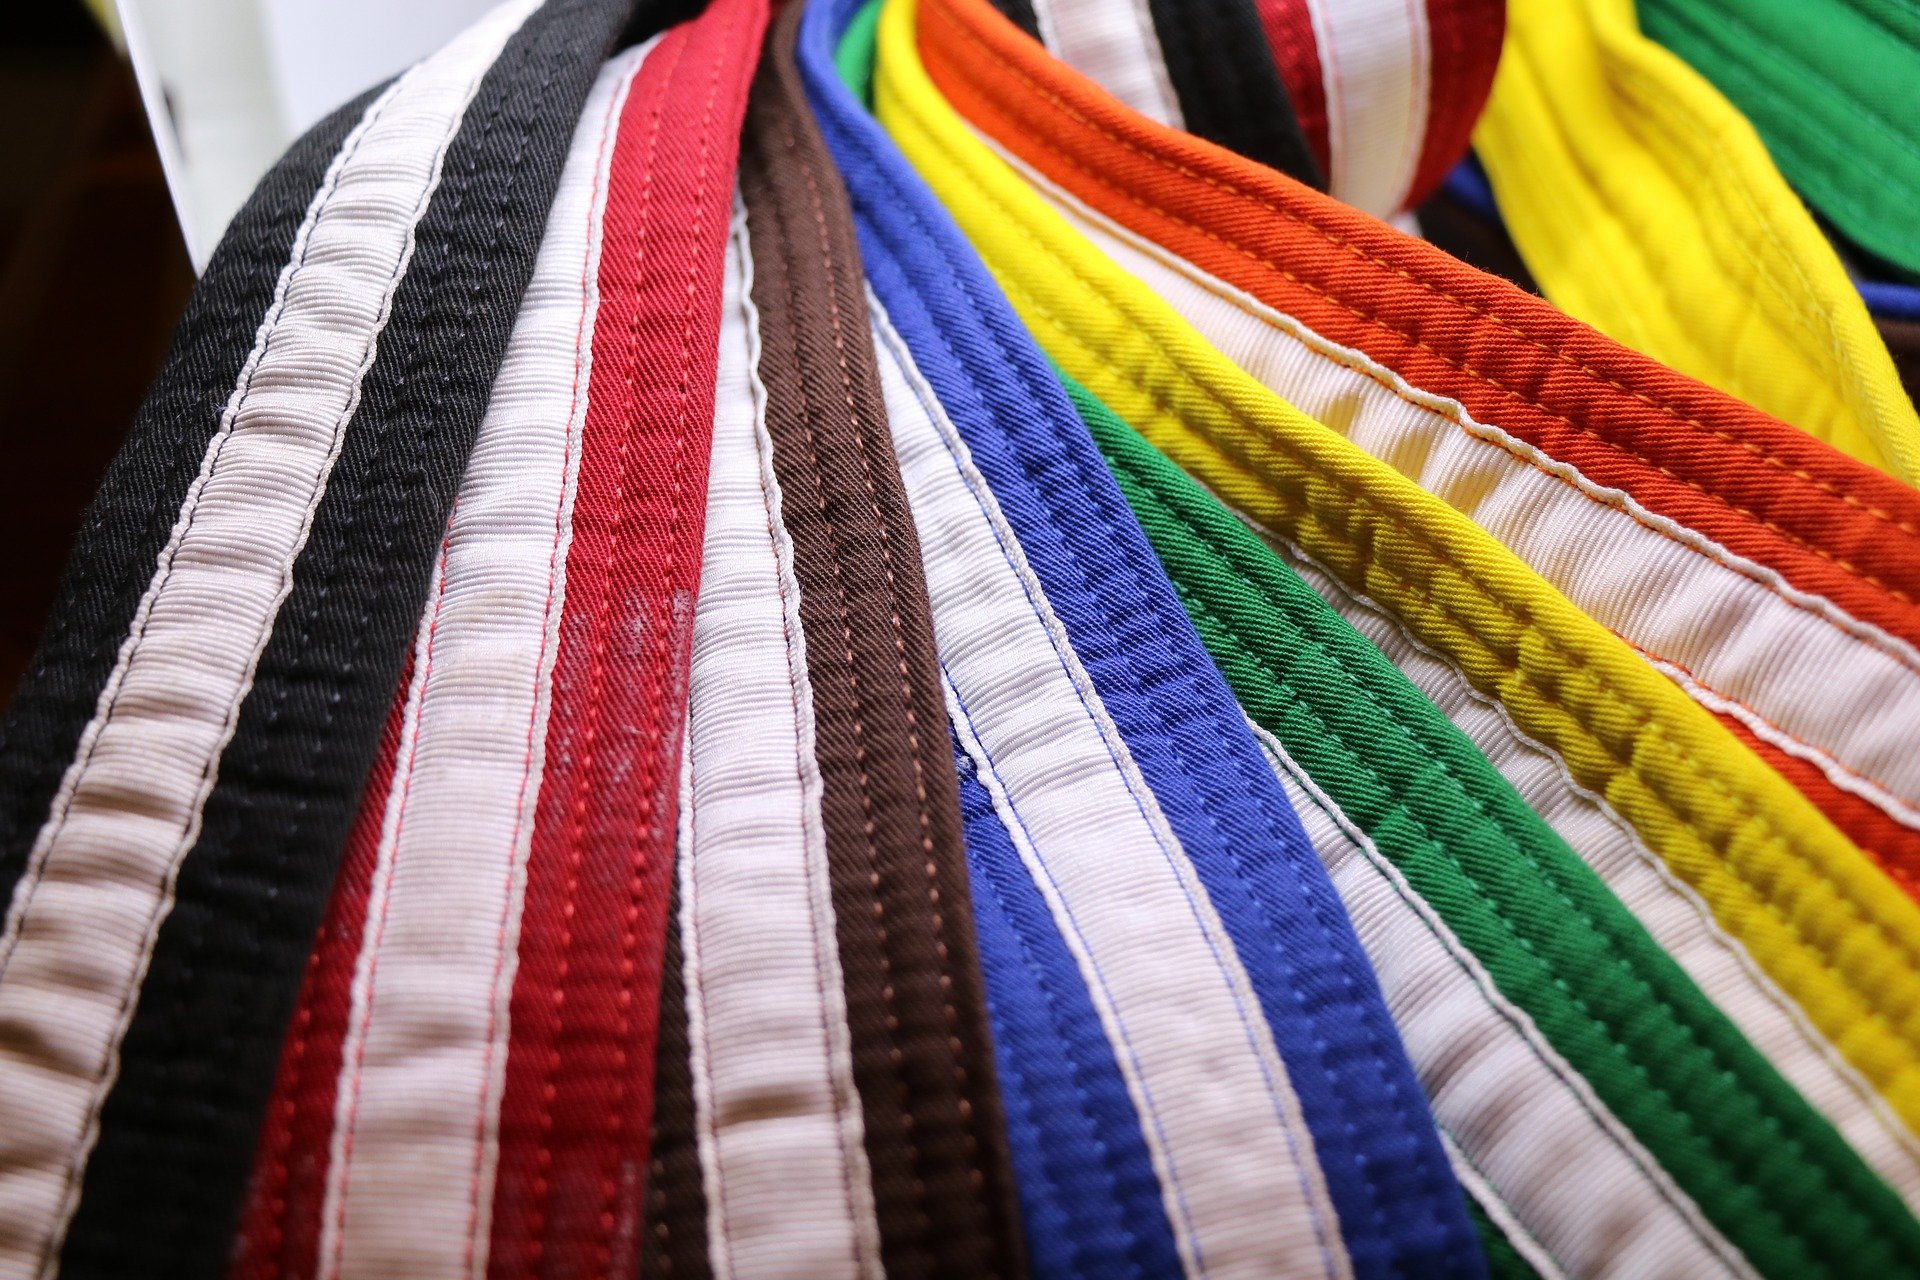 All grades from Blue belt to Brown & Red belt